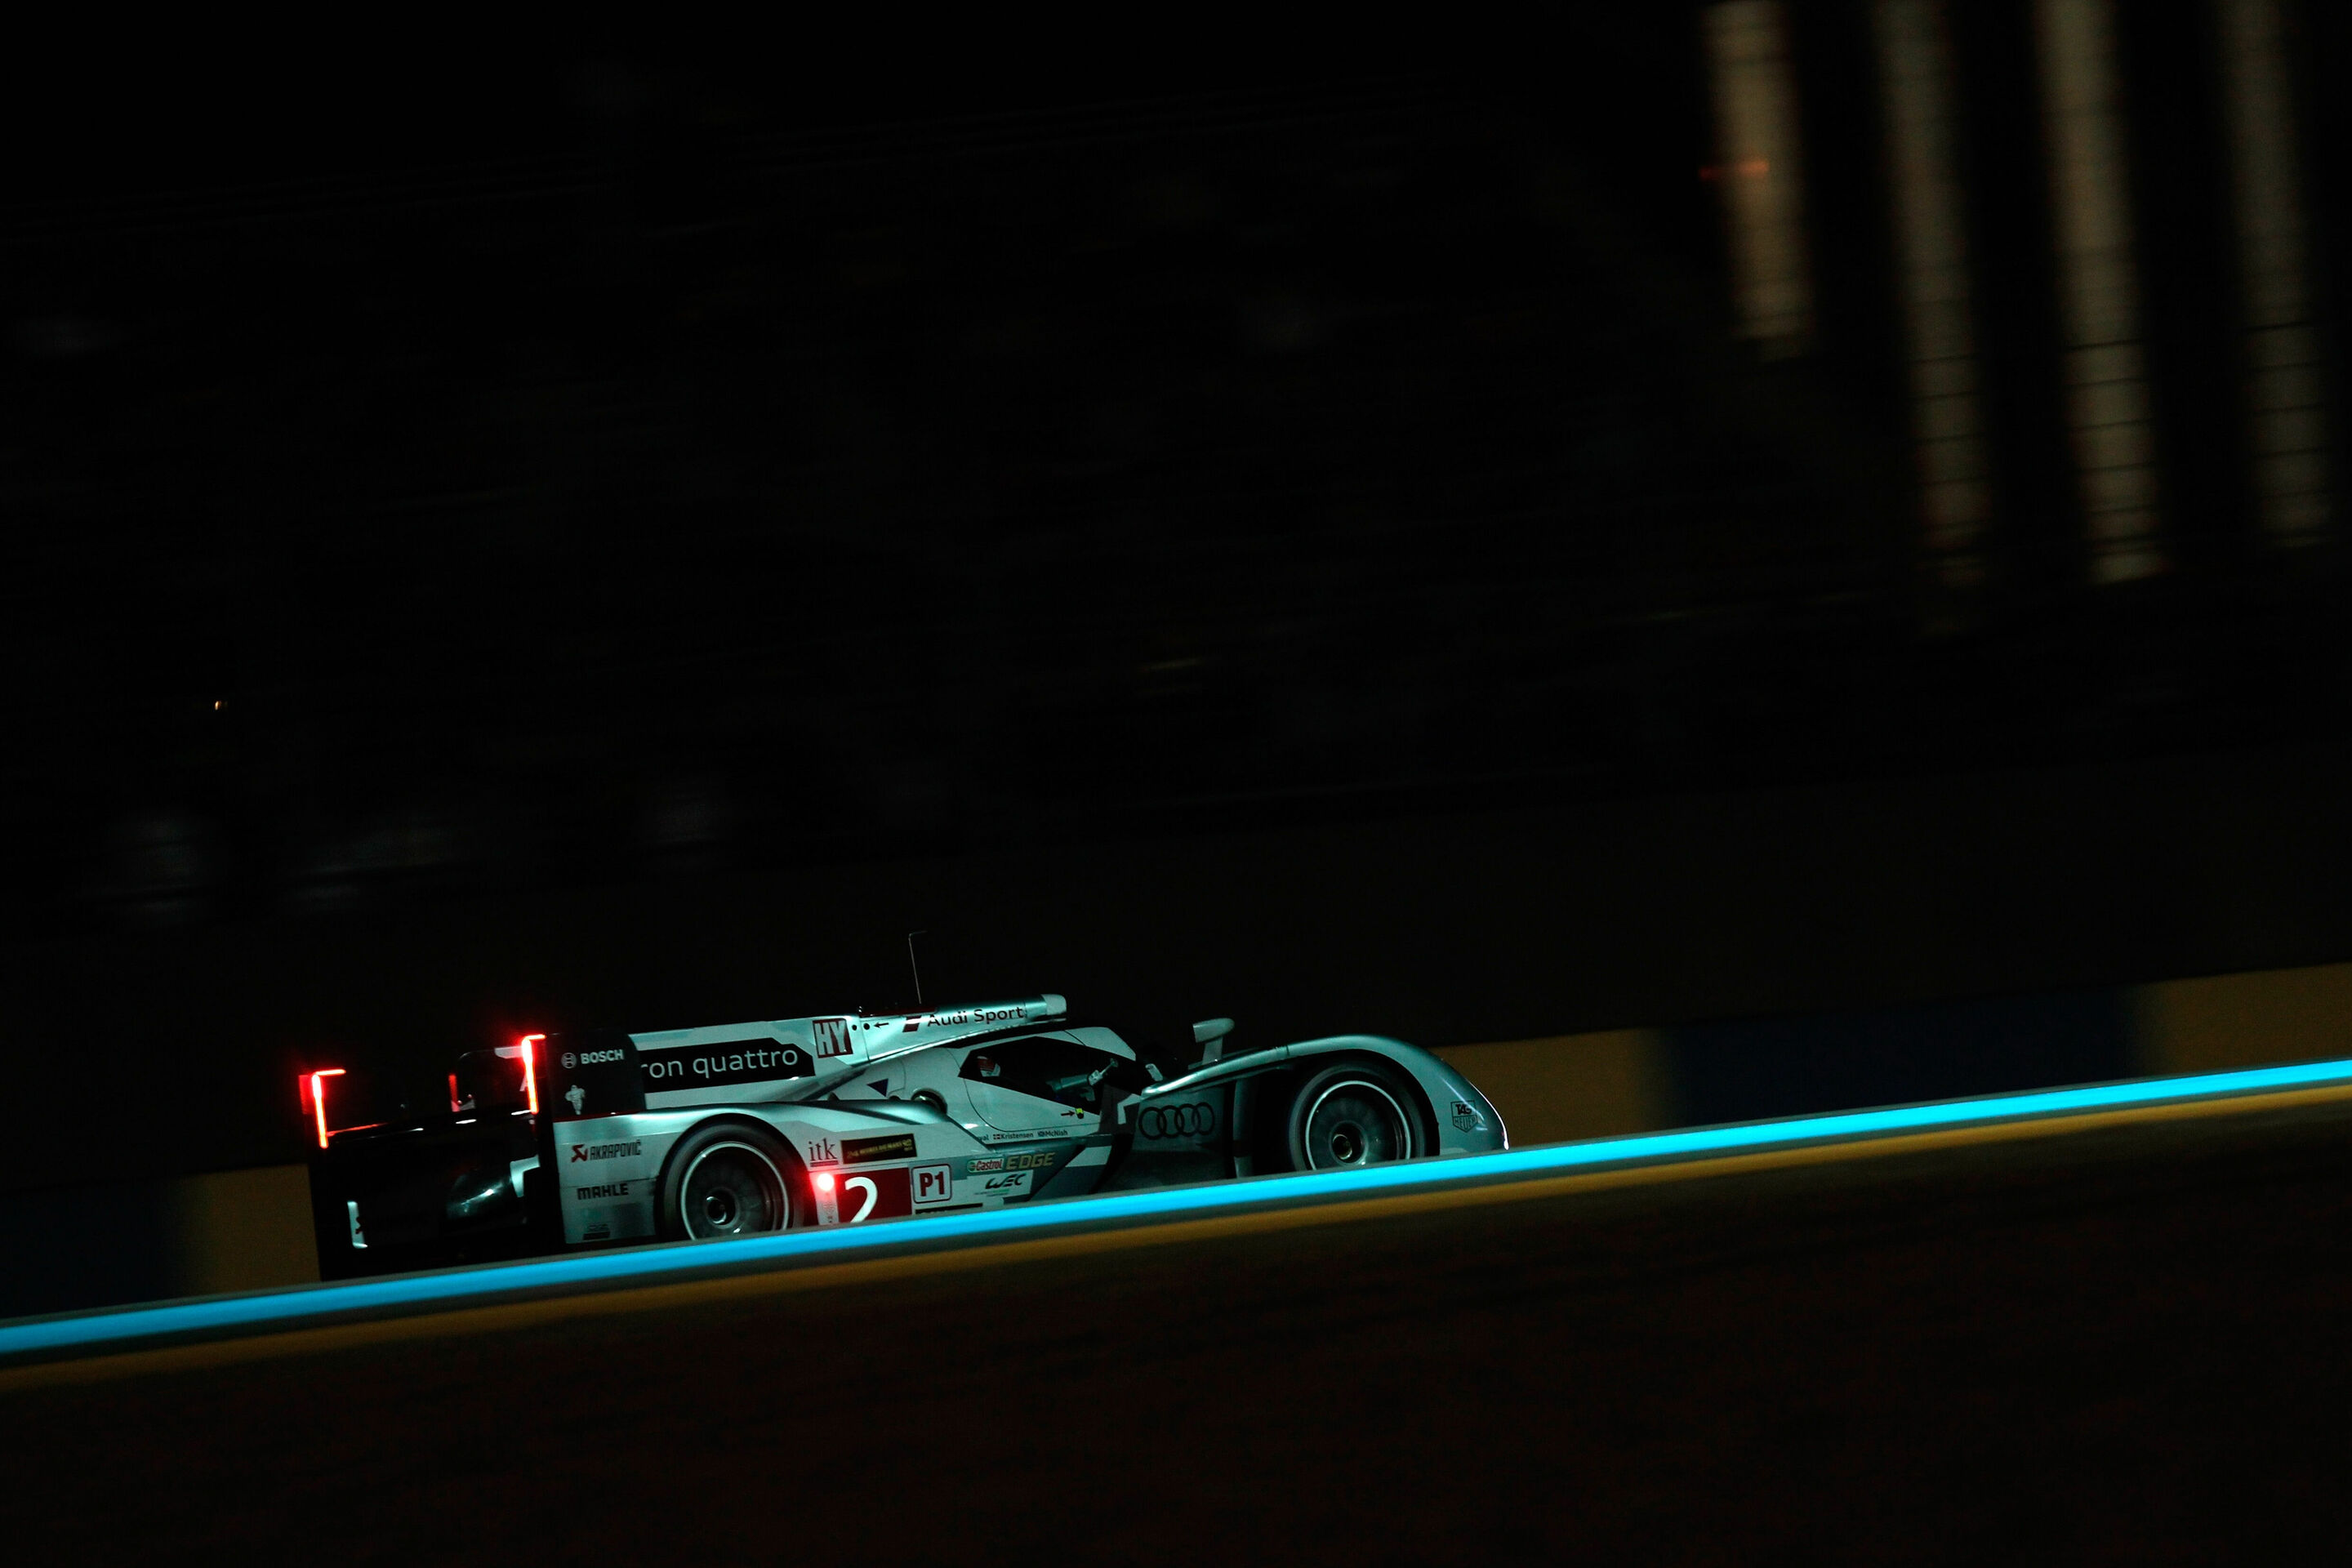 Efficiency of Audi drivers crucial in WEC